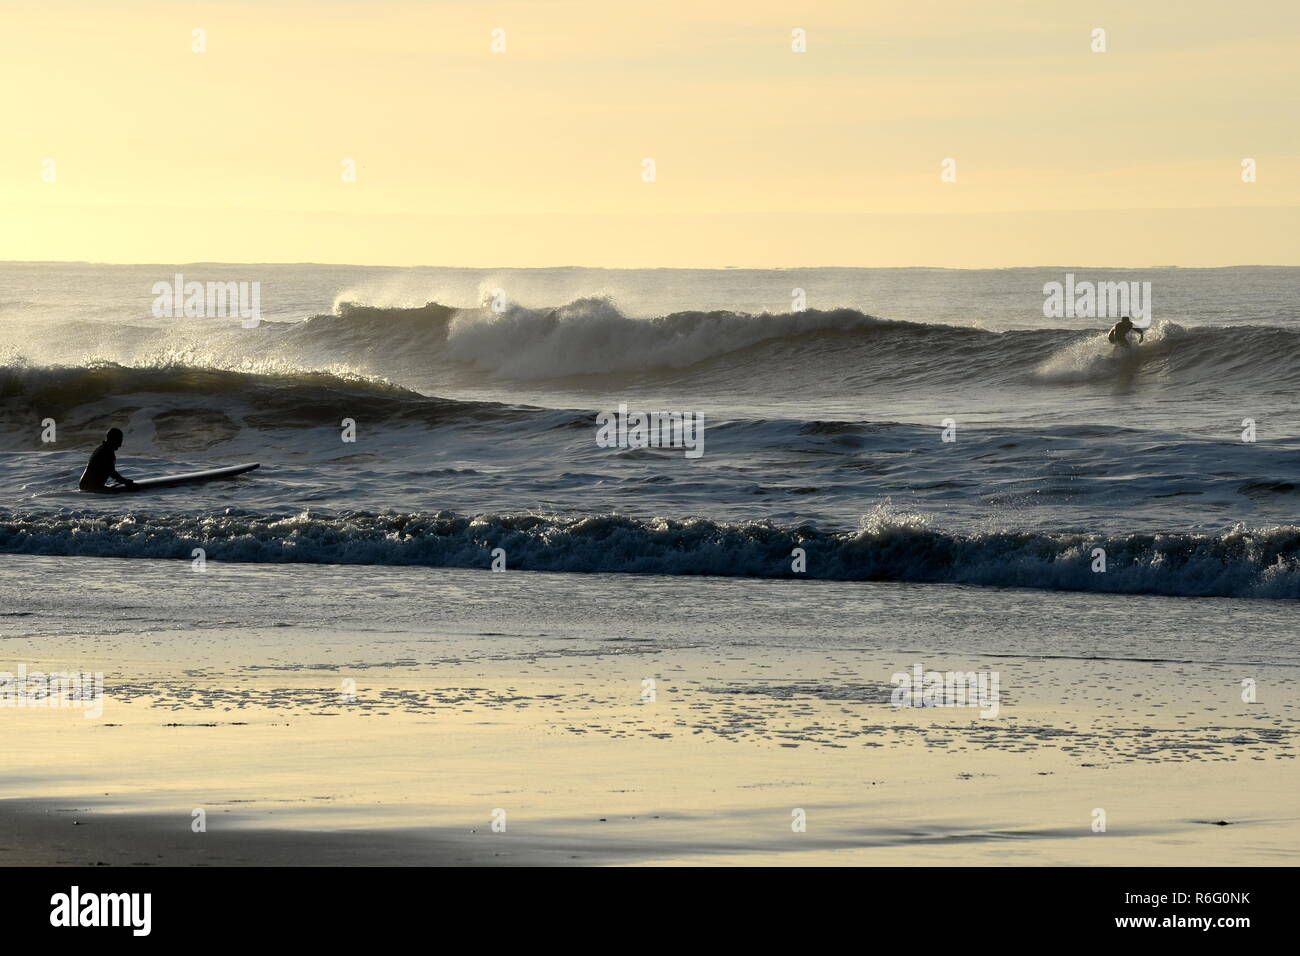 A surfer gets to his feet on an early morning wave with a friend about to join him in the shallows Stock Photo